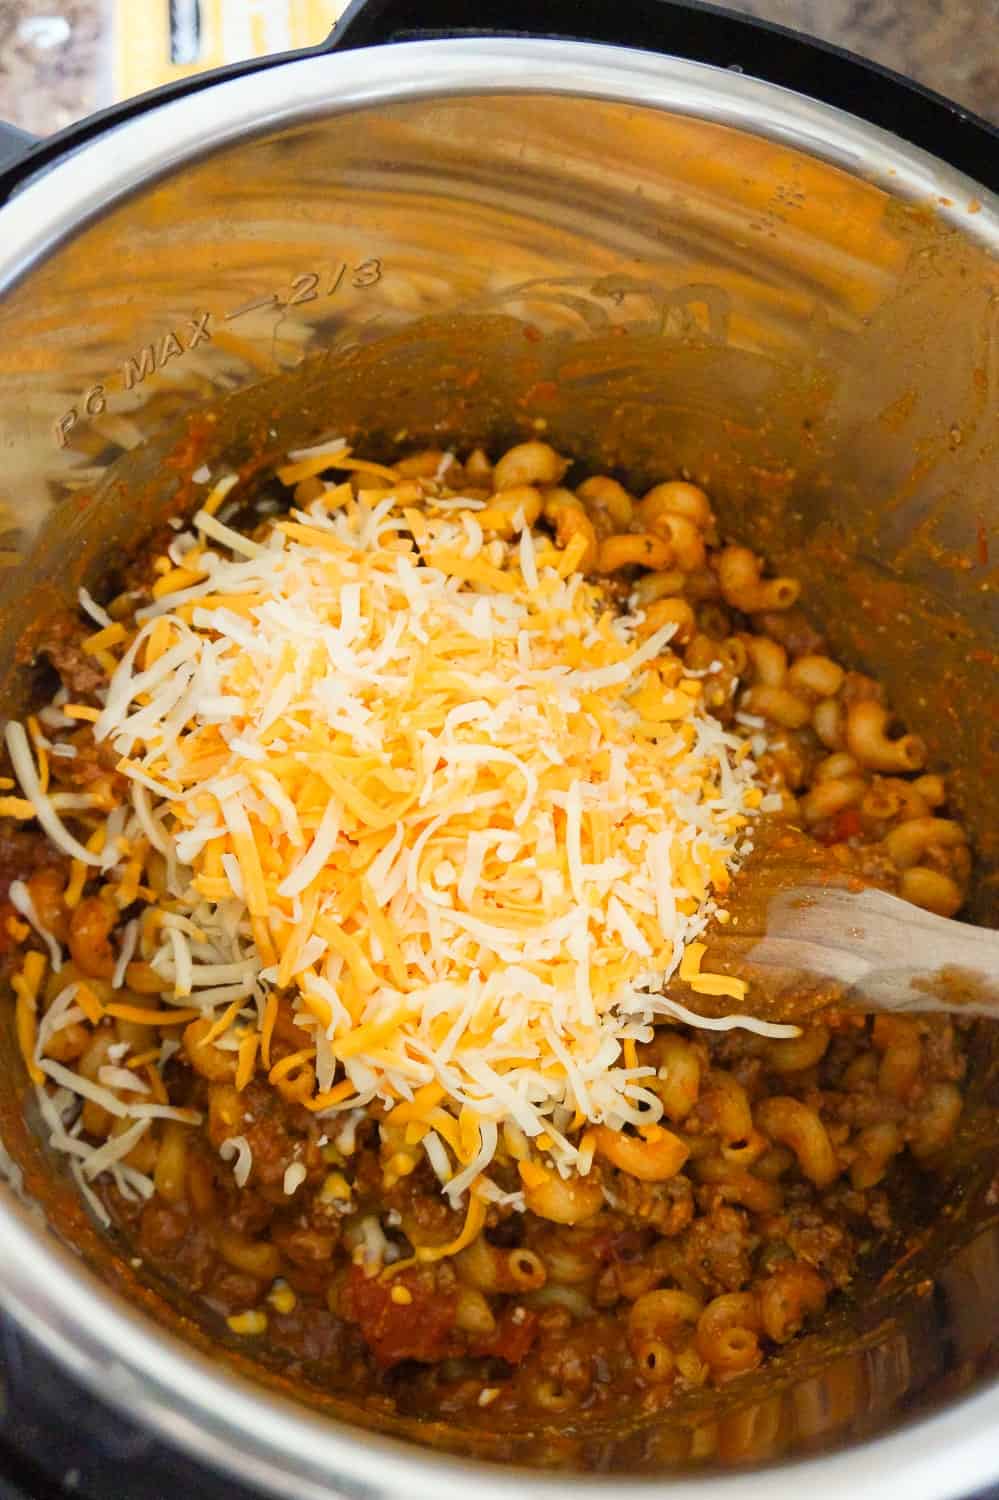 shredded mozzarella and cheddar cheese on top of pasta in an Instant Pot